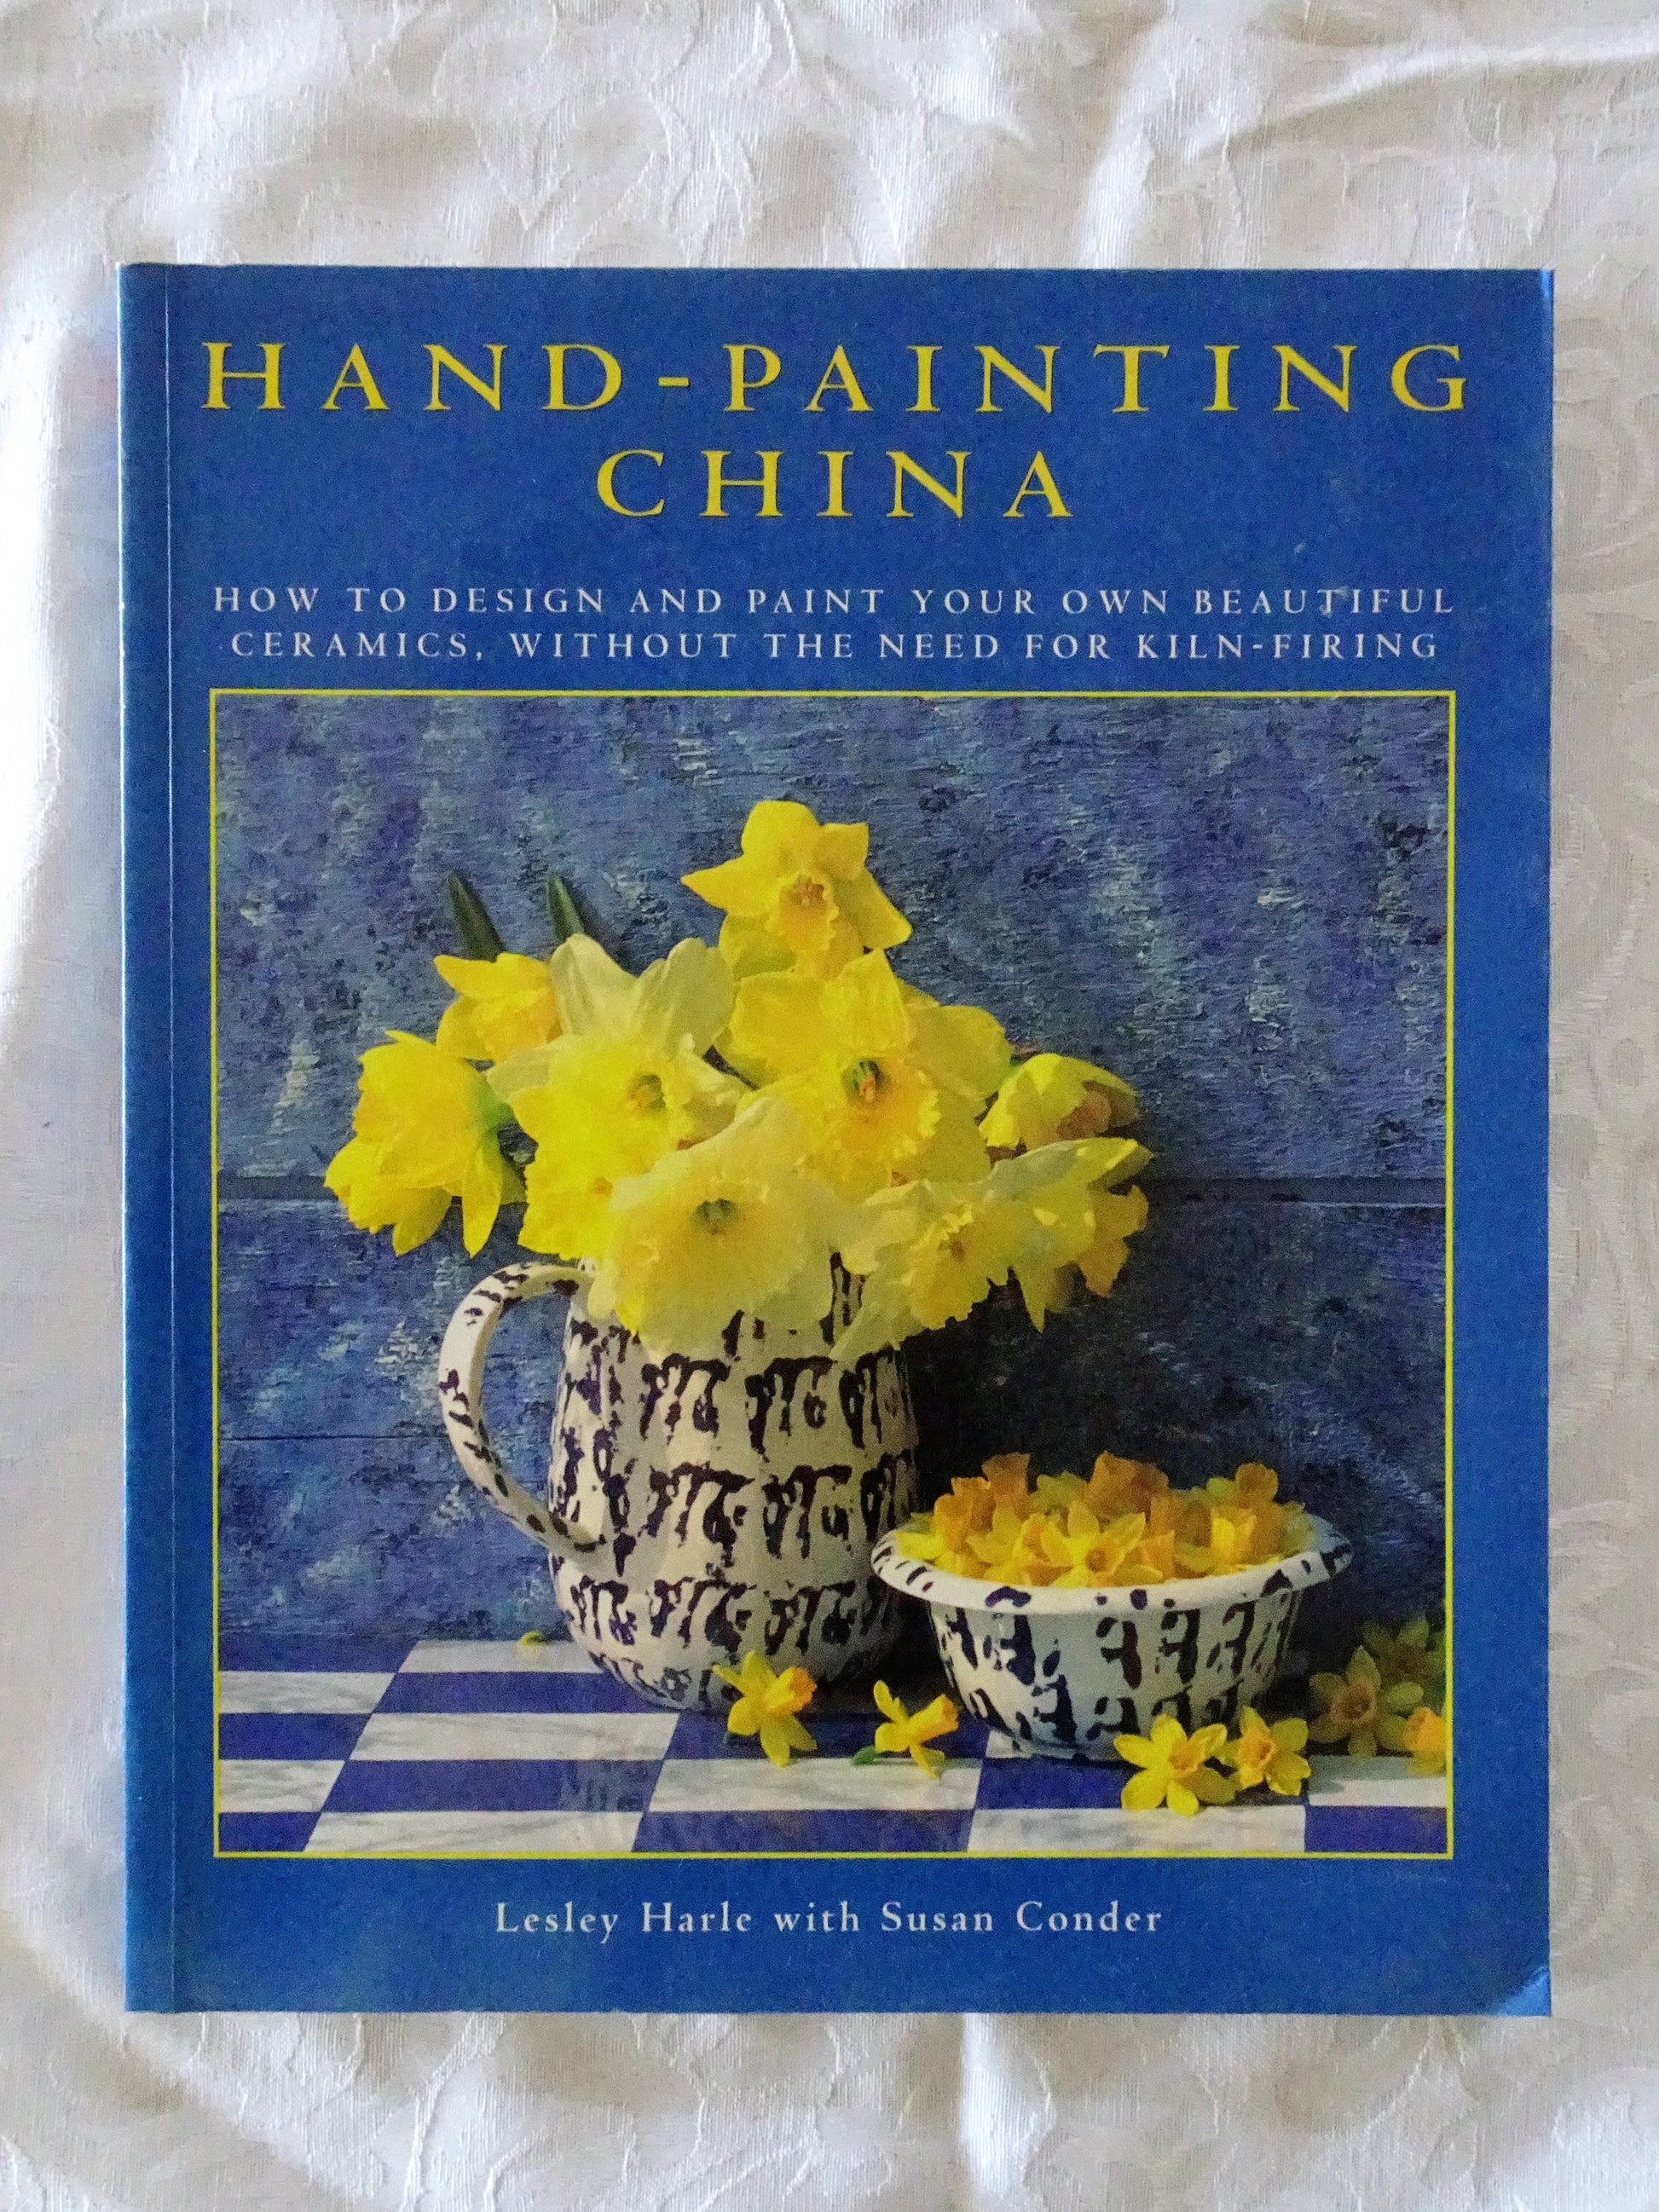 Hand-Painting China  How to design and paint your own beautiful ceramics, without the need for kiln-firing  by Lesley Harle and Susan Conder, photographs by Debbie Patterson